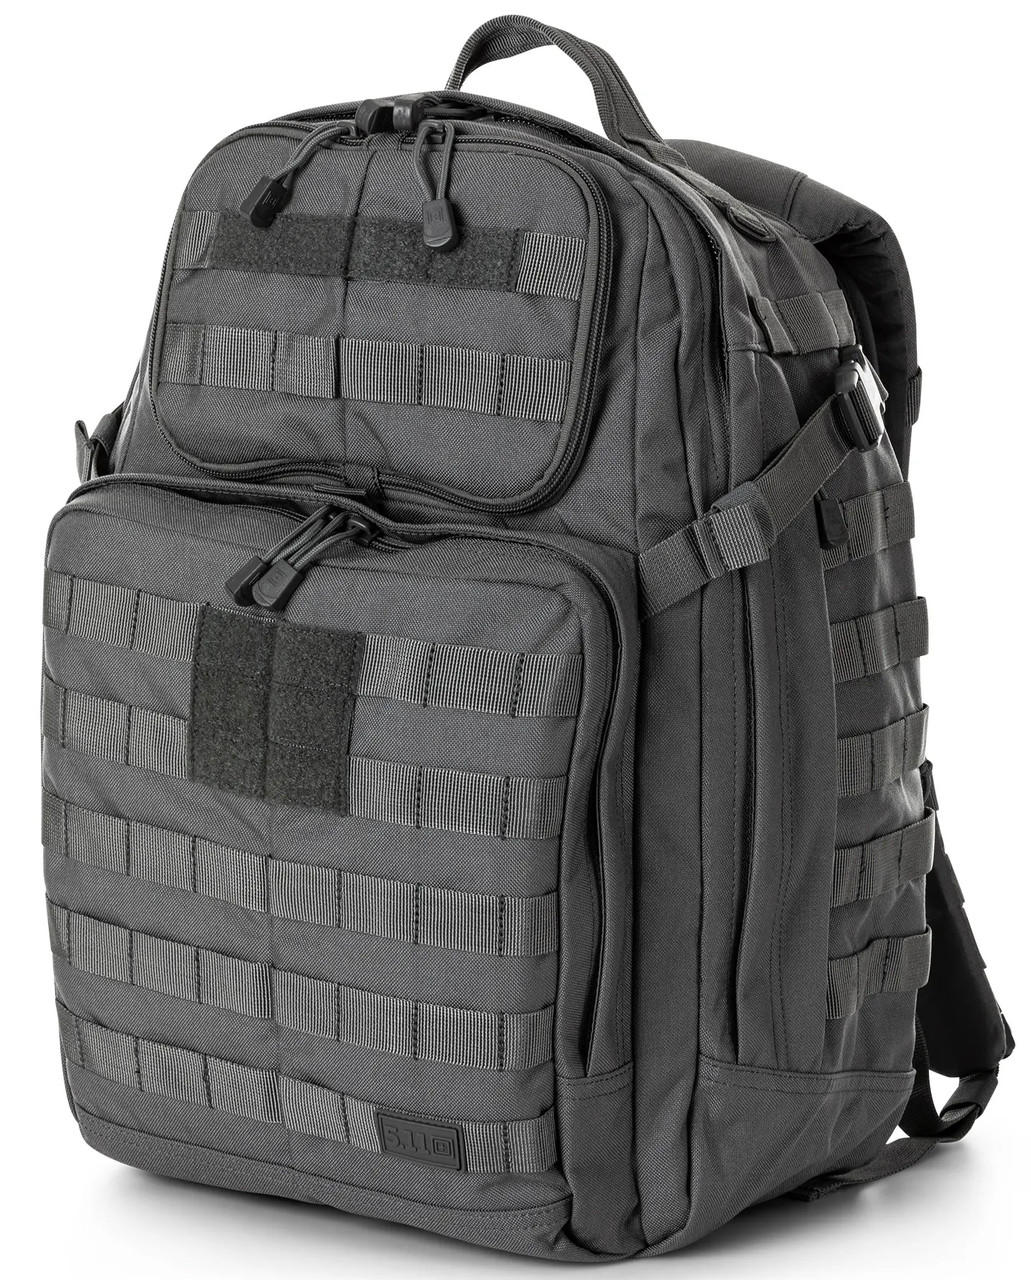  5.11 Tactical Backpack, Rush 24 2.0, Military Molle Pack, CCW  and Laptop Compartment, 37 Liter, Medium, Style 56563, Black : Sports &  Outdoors